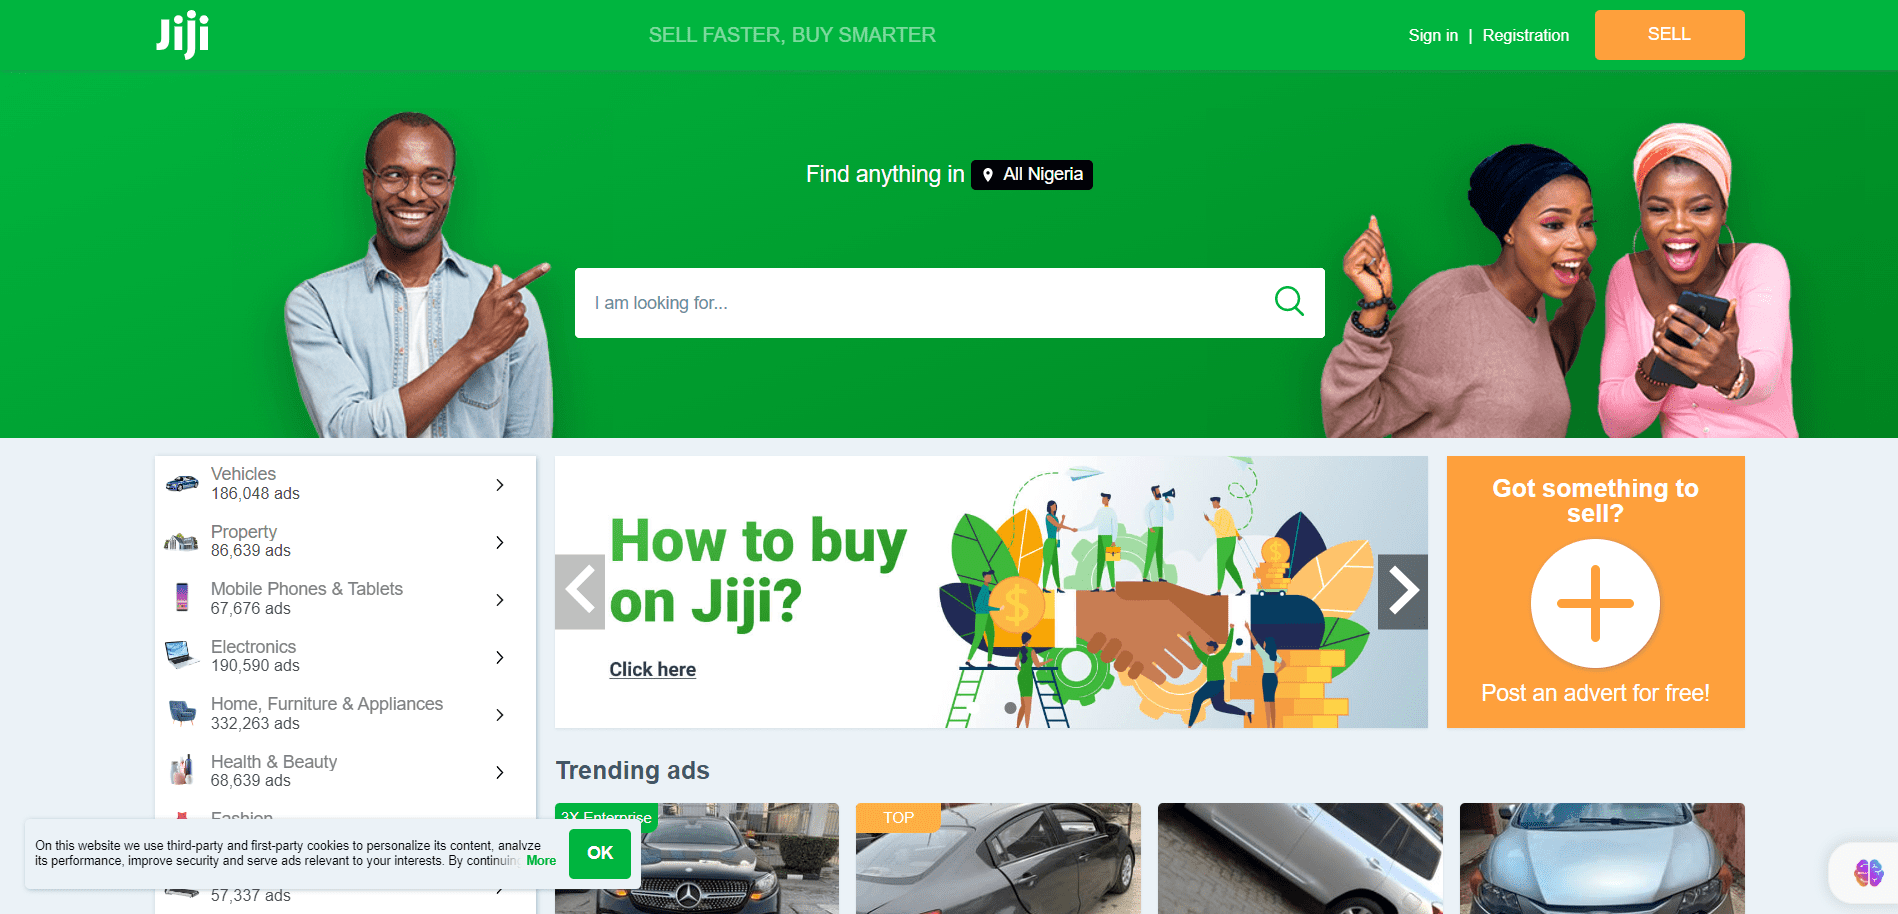 How to Sell on Jiji